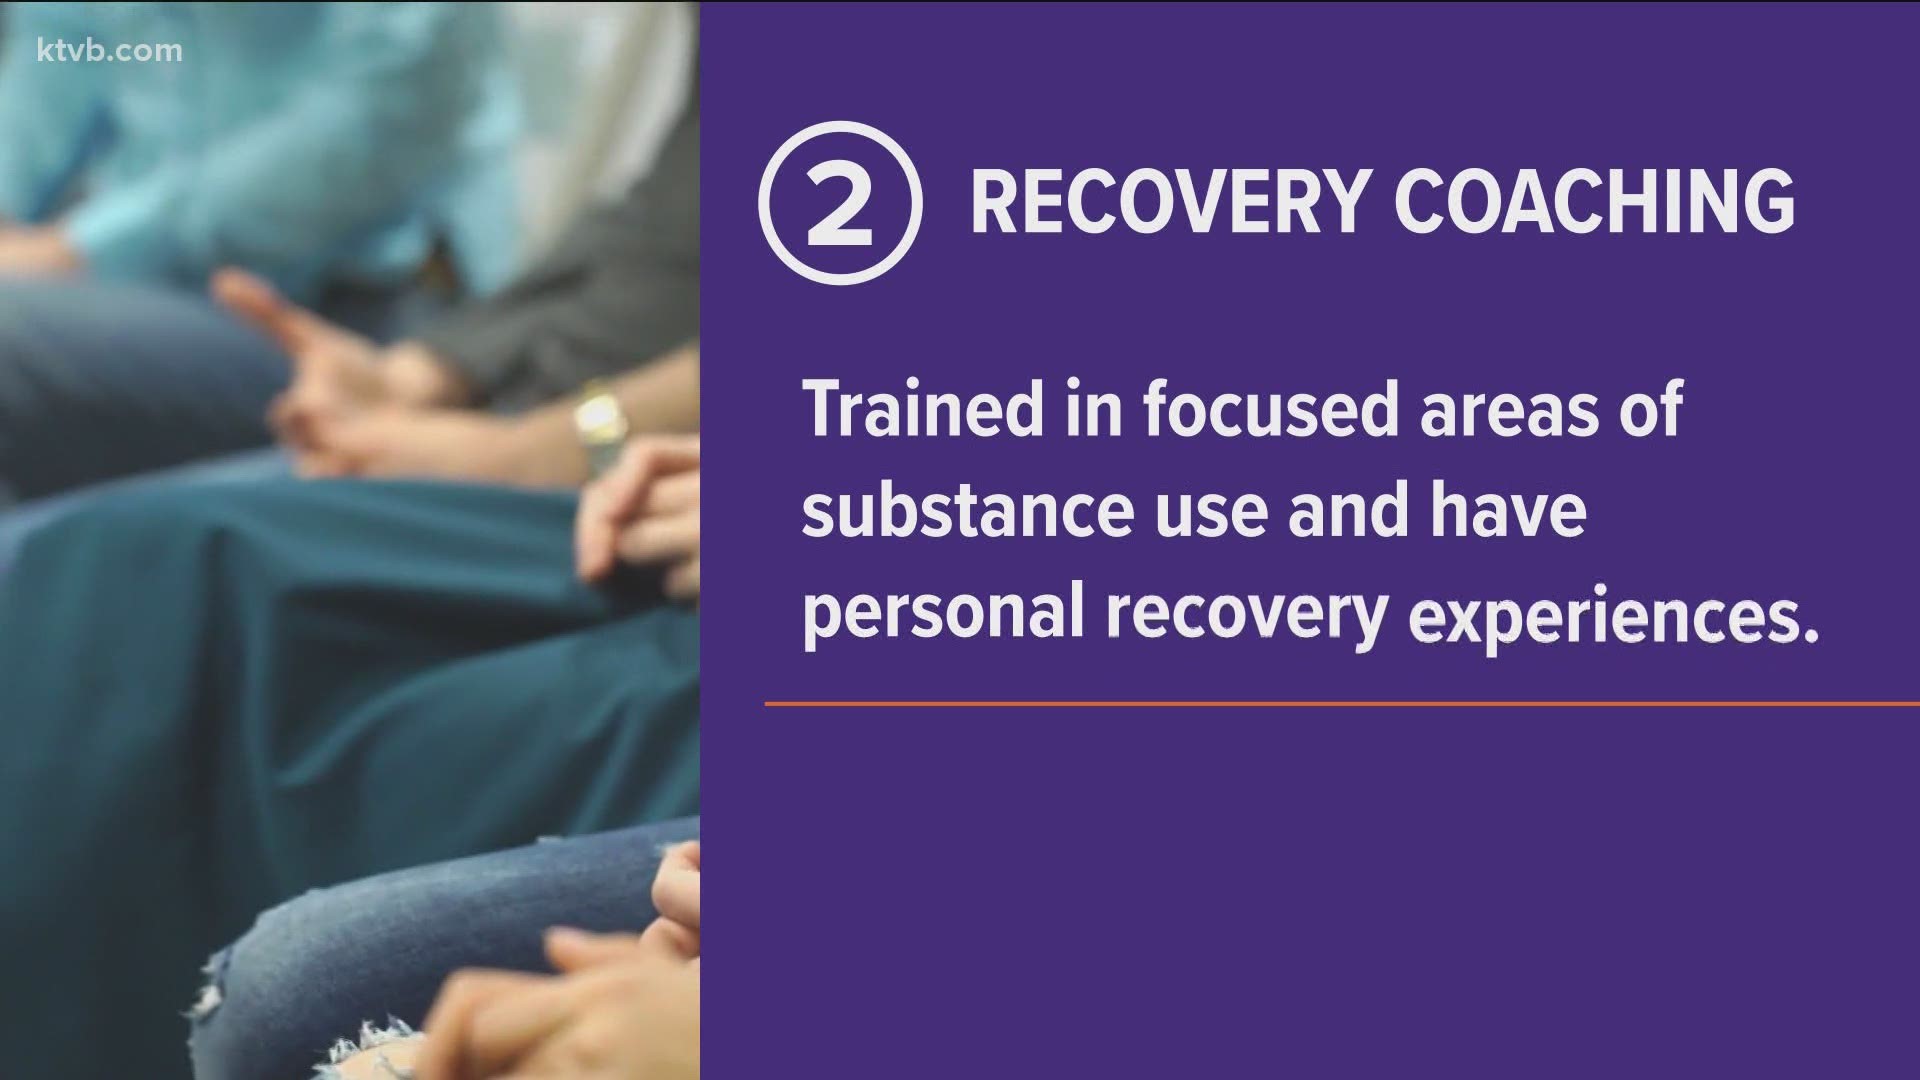 September is National Recovery Month, which is all about increasing awareness of substance use disorders, and crushing the stigma behind asking for help.